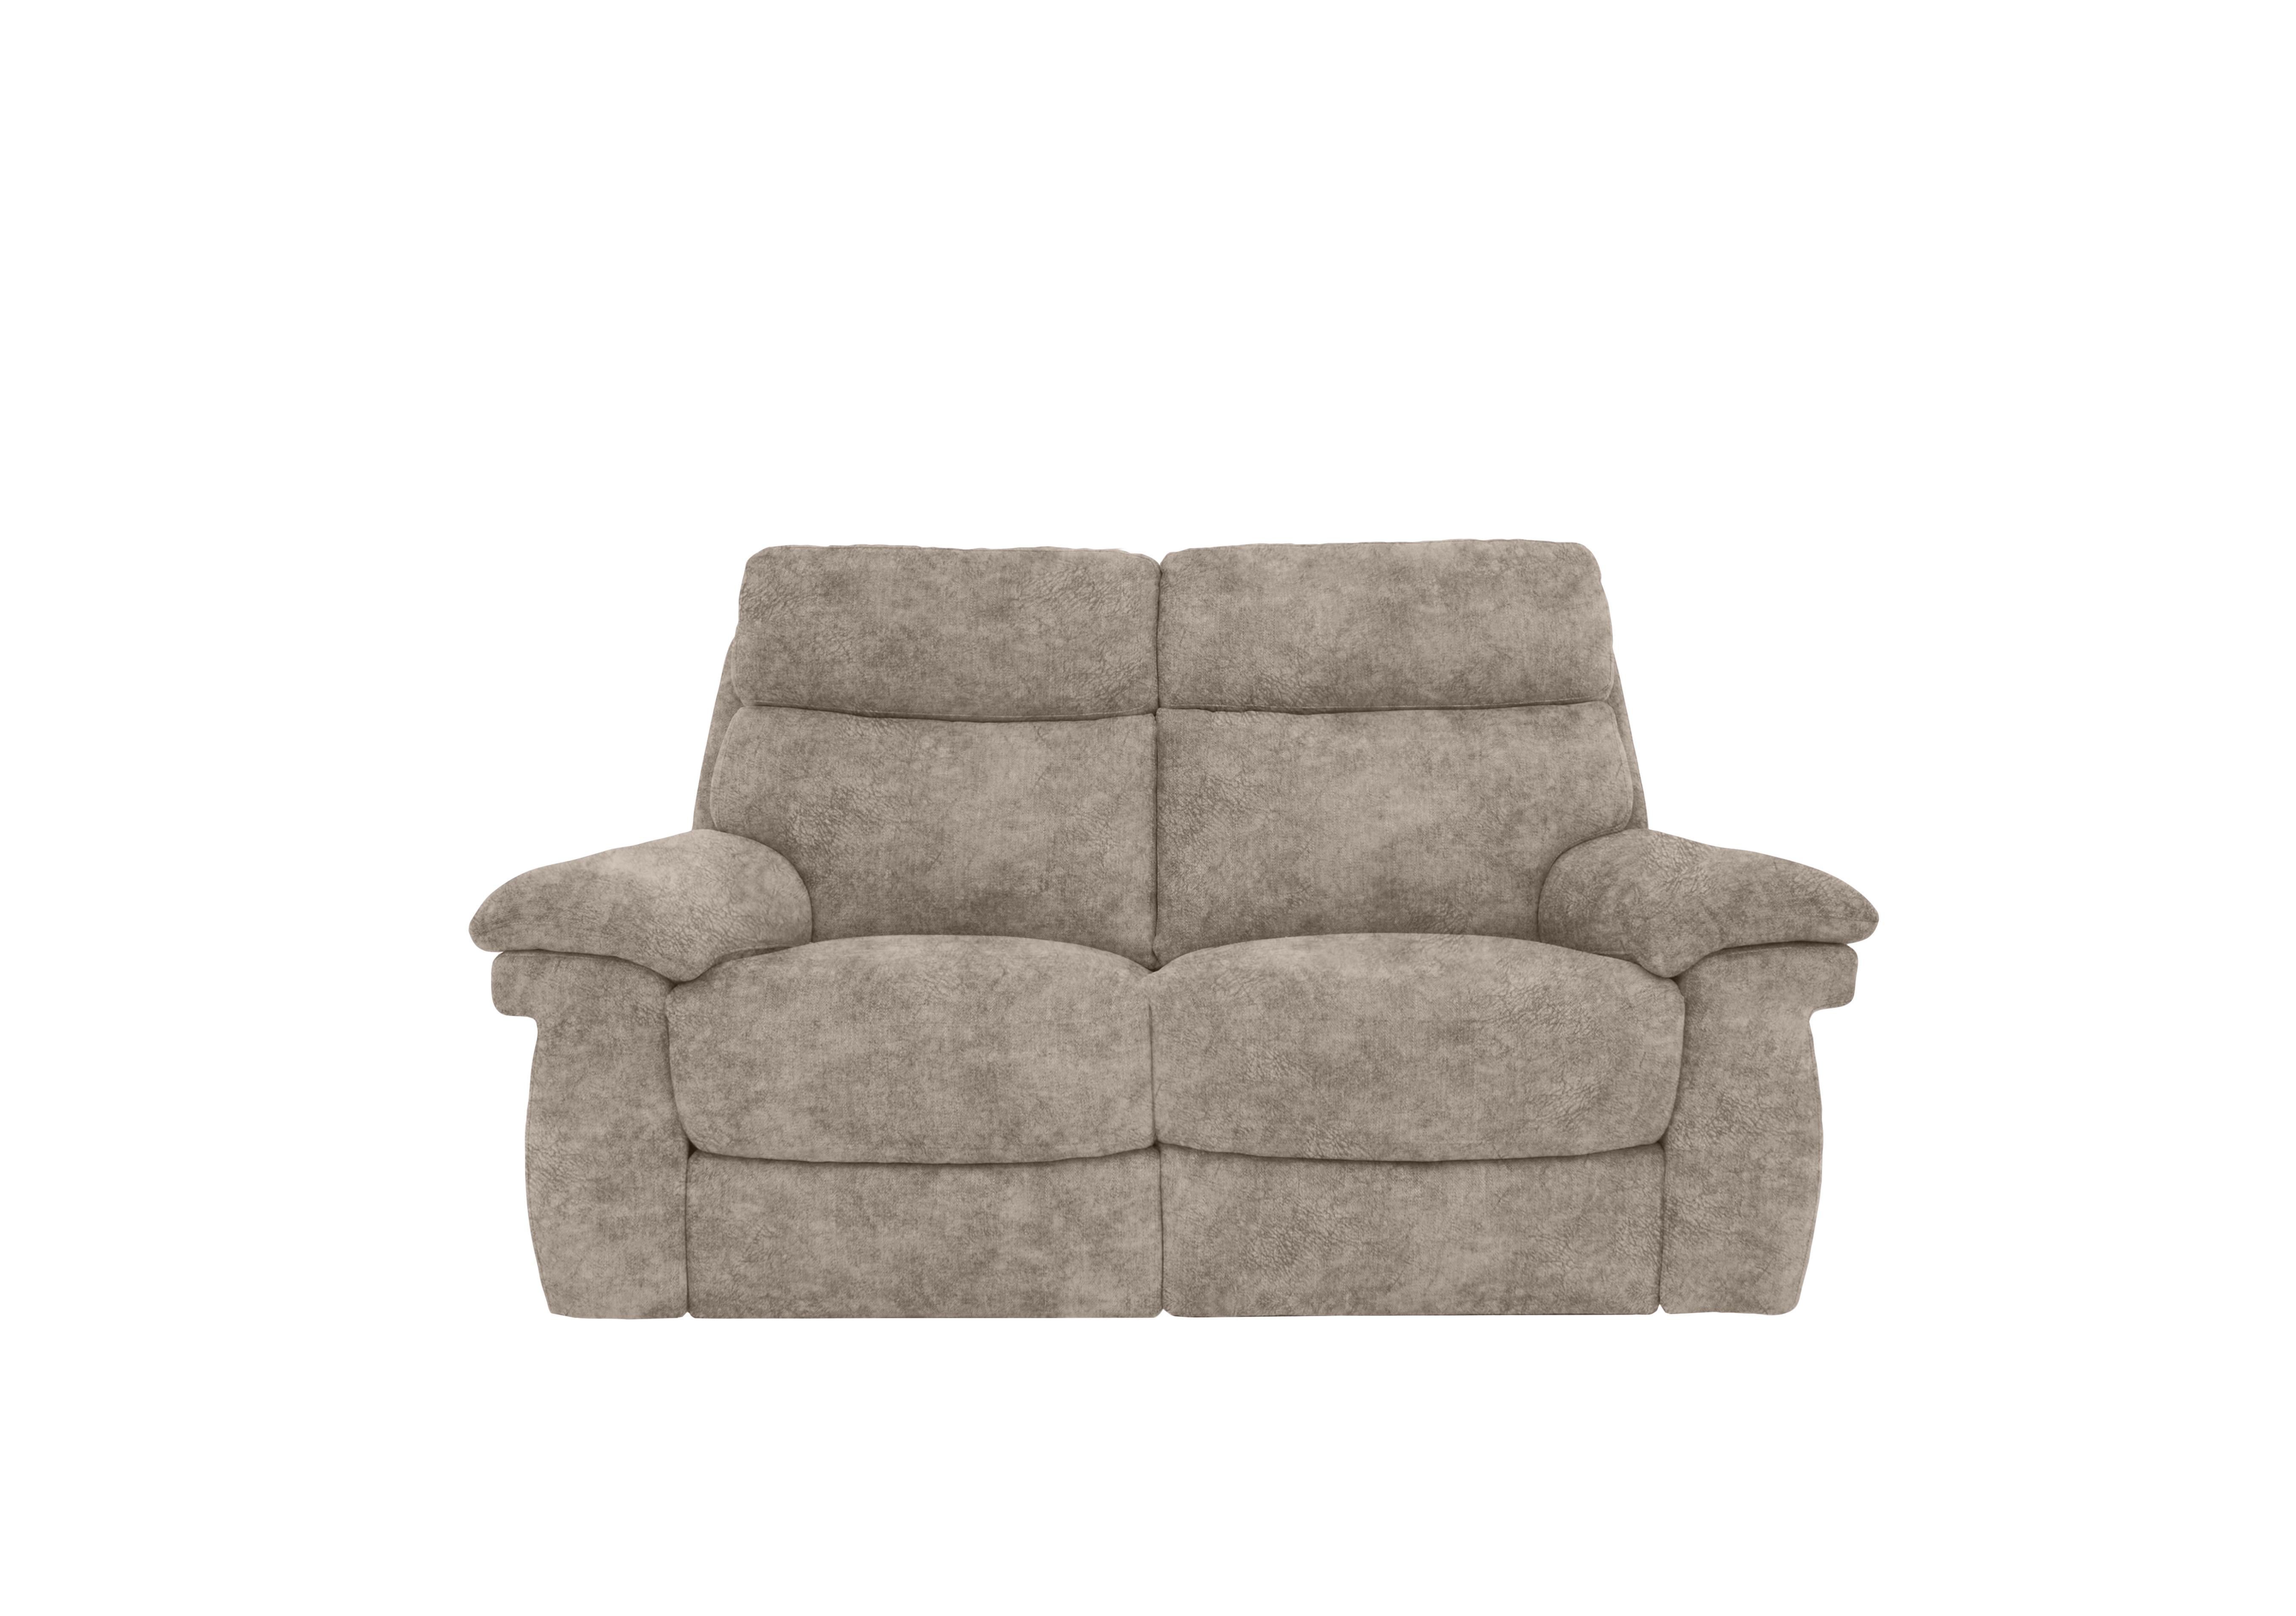 Serene 2 Seater Fabric Power Recliner Sofa with Power Headrests and Power Lumbar in Bfa-Bnn-R29 Mink on Furniture Village